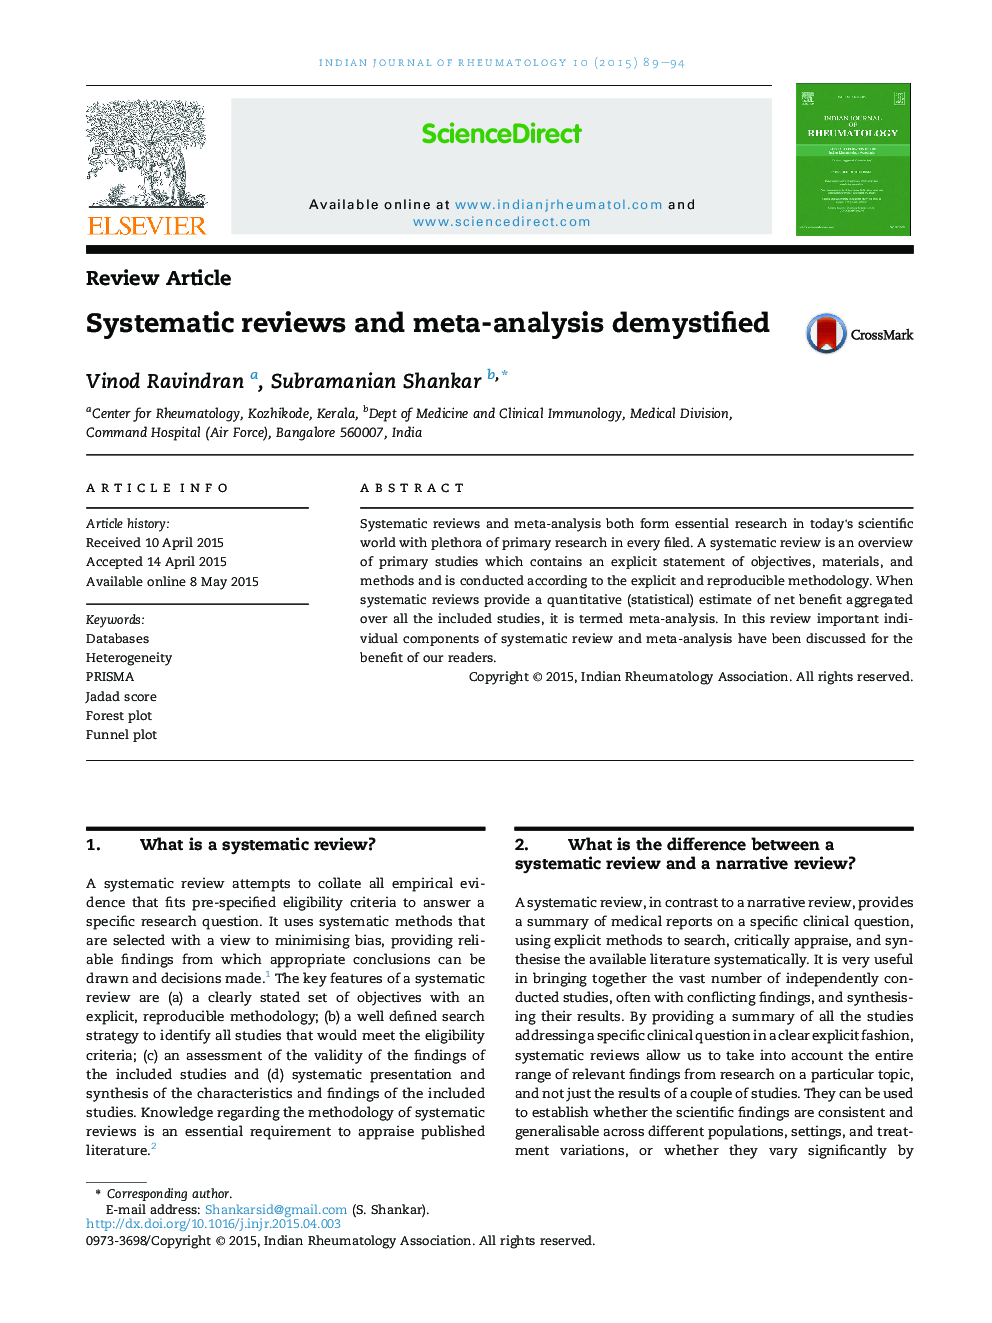 Systematic reviews and meta-analysis demystified